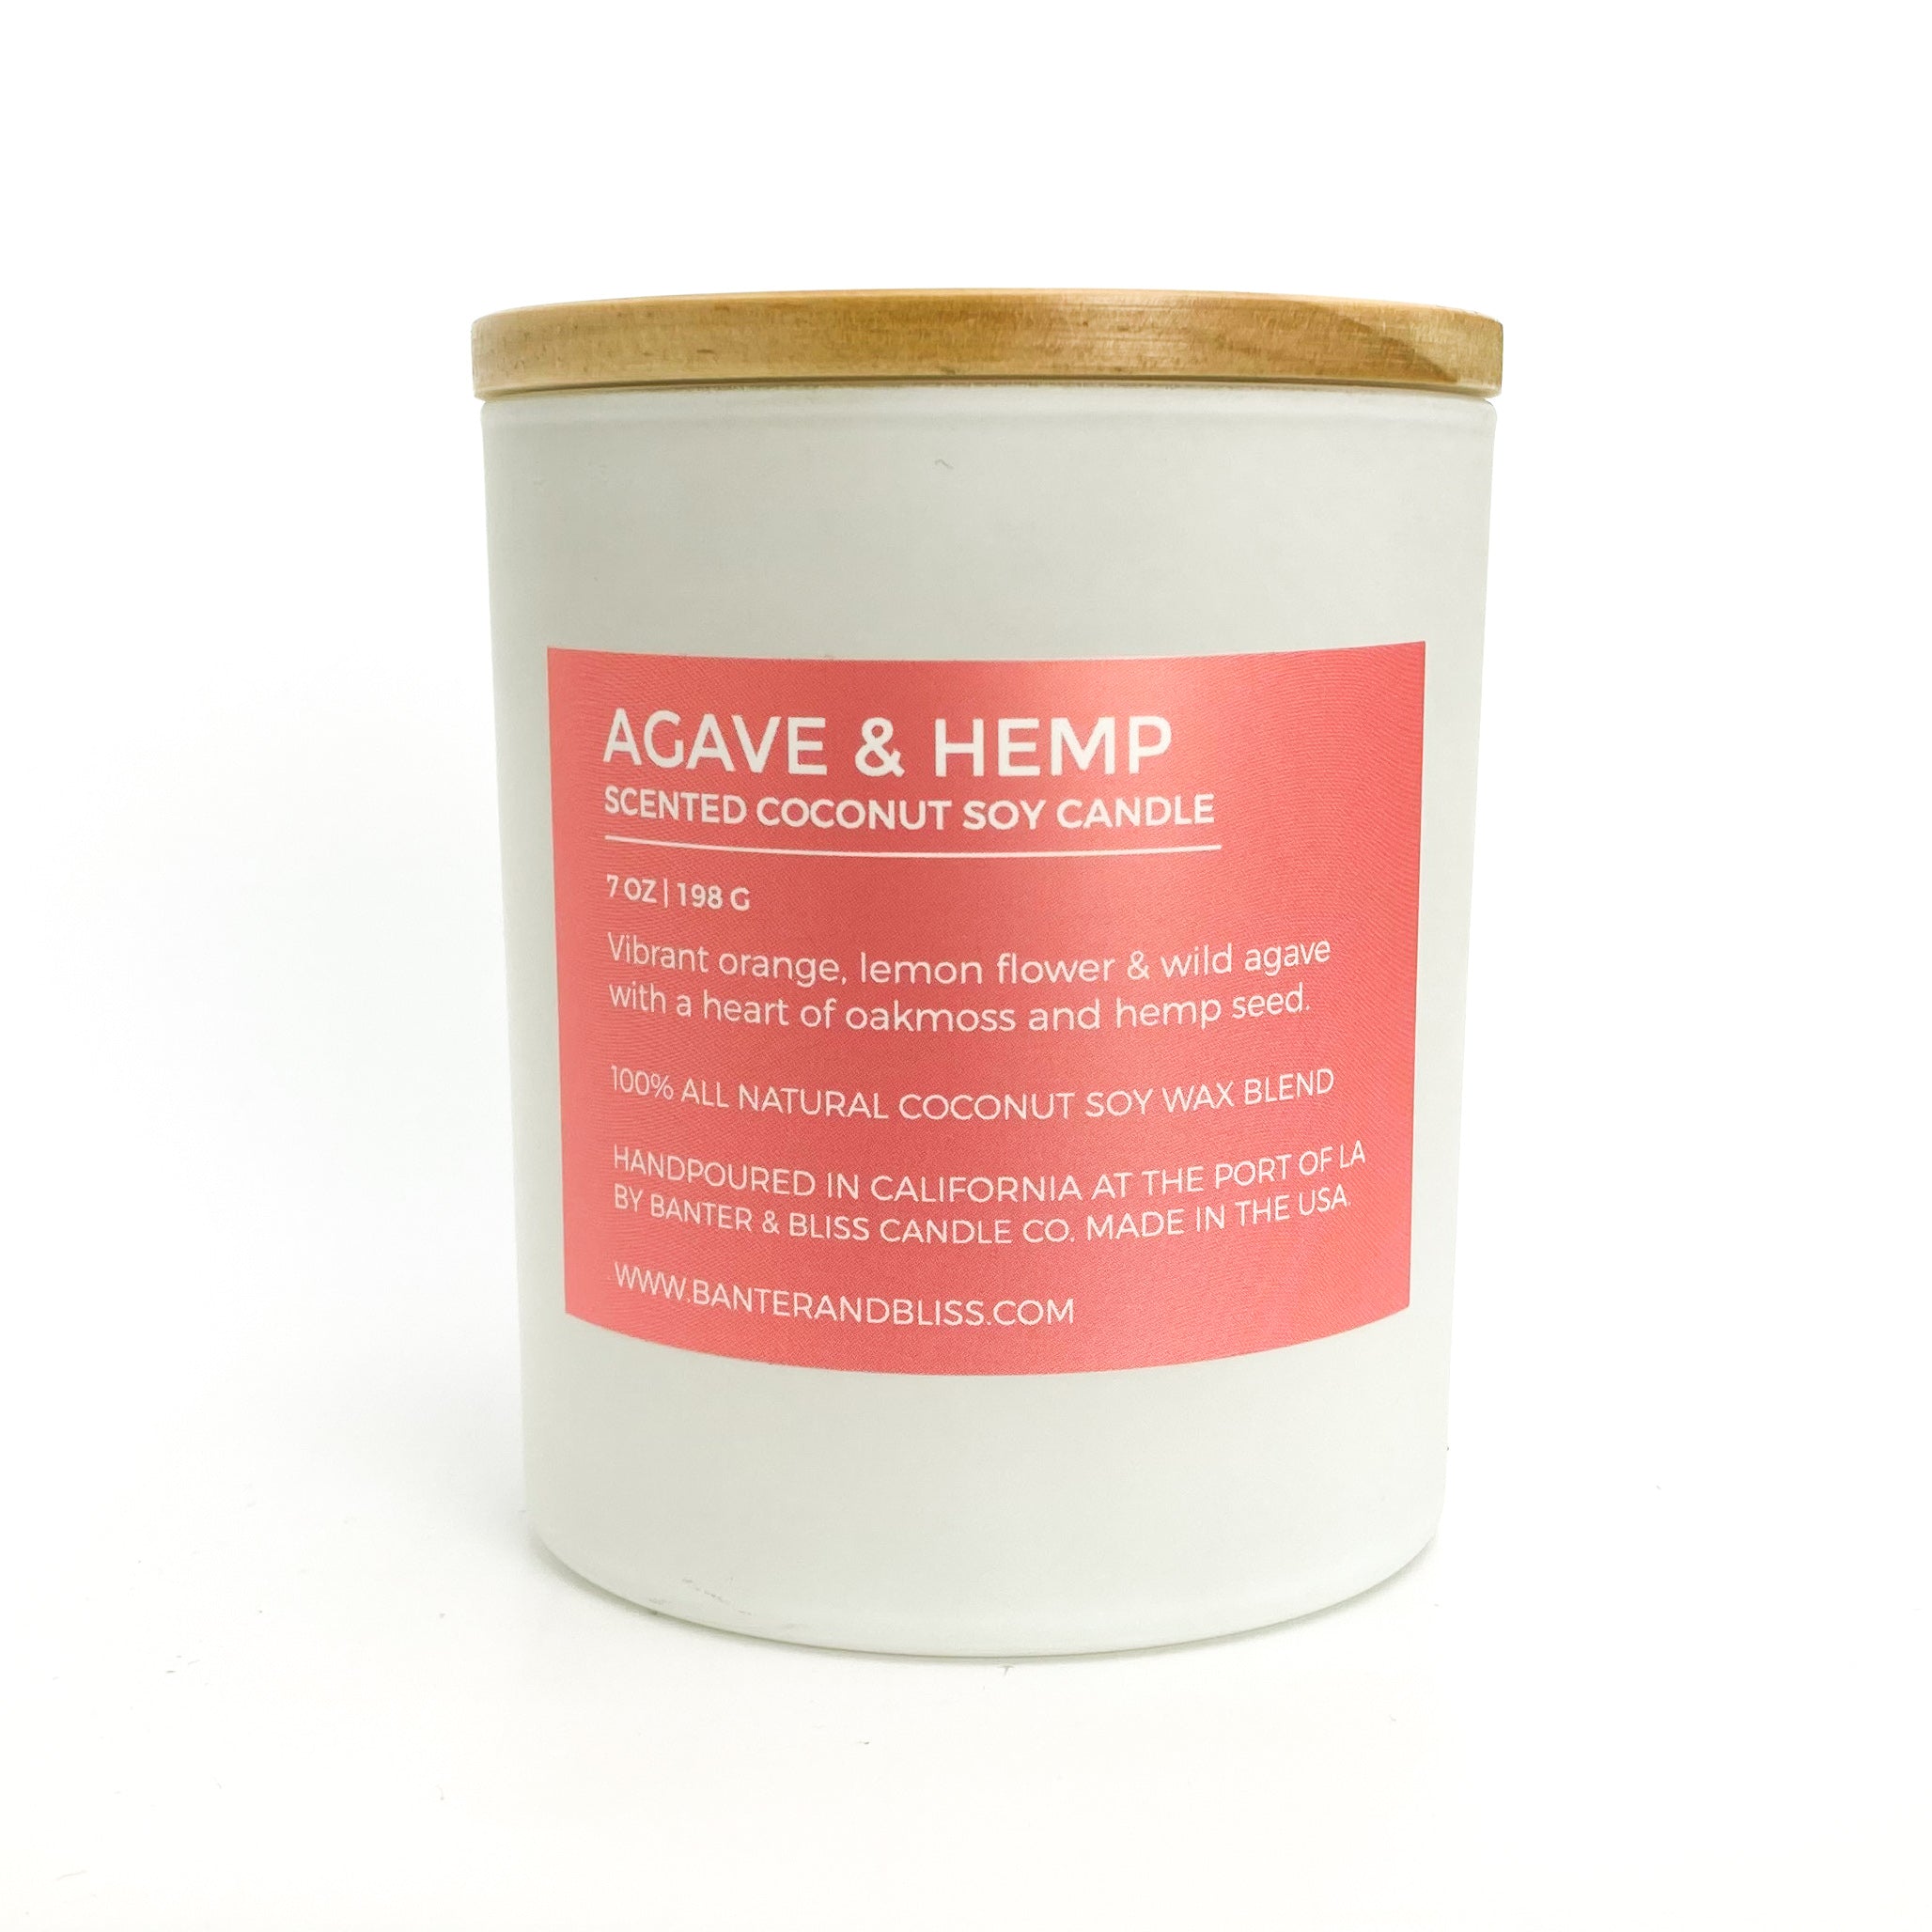 Agave & Hemp. 7 oz. Scented Coconut Soy Candle.